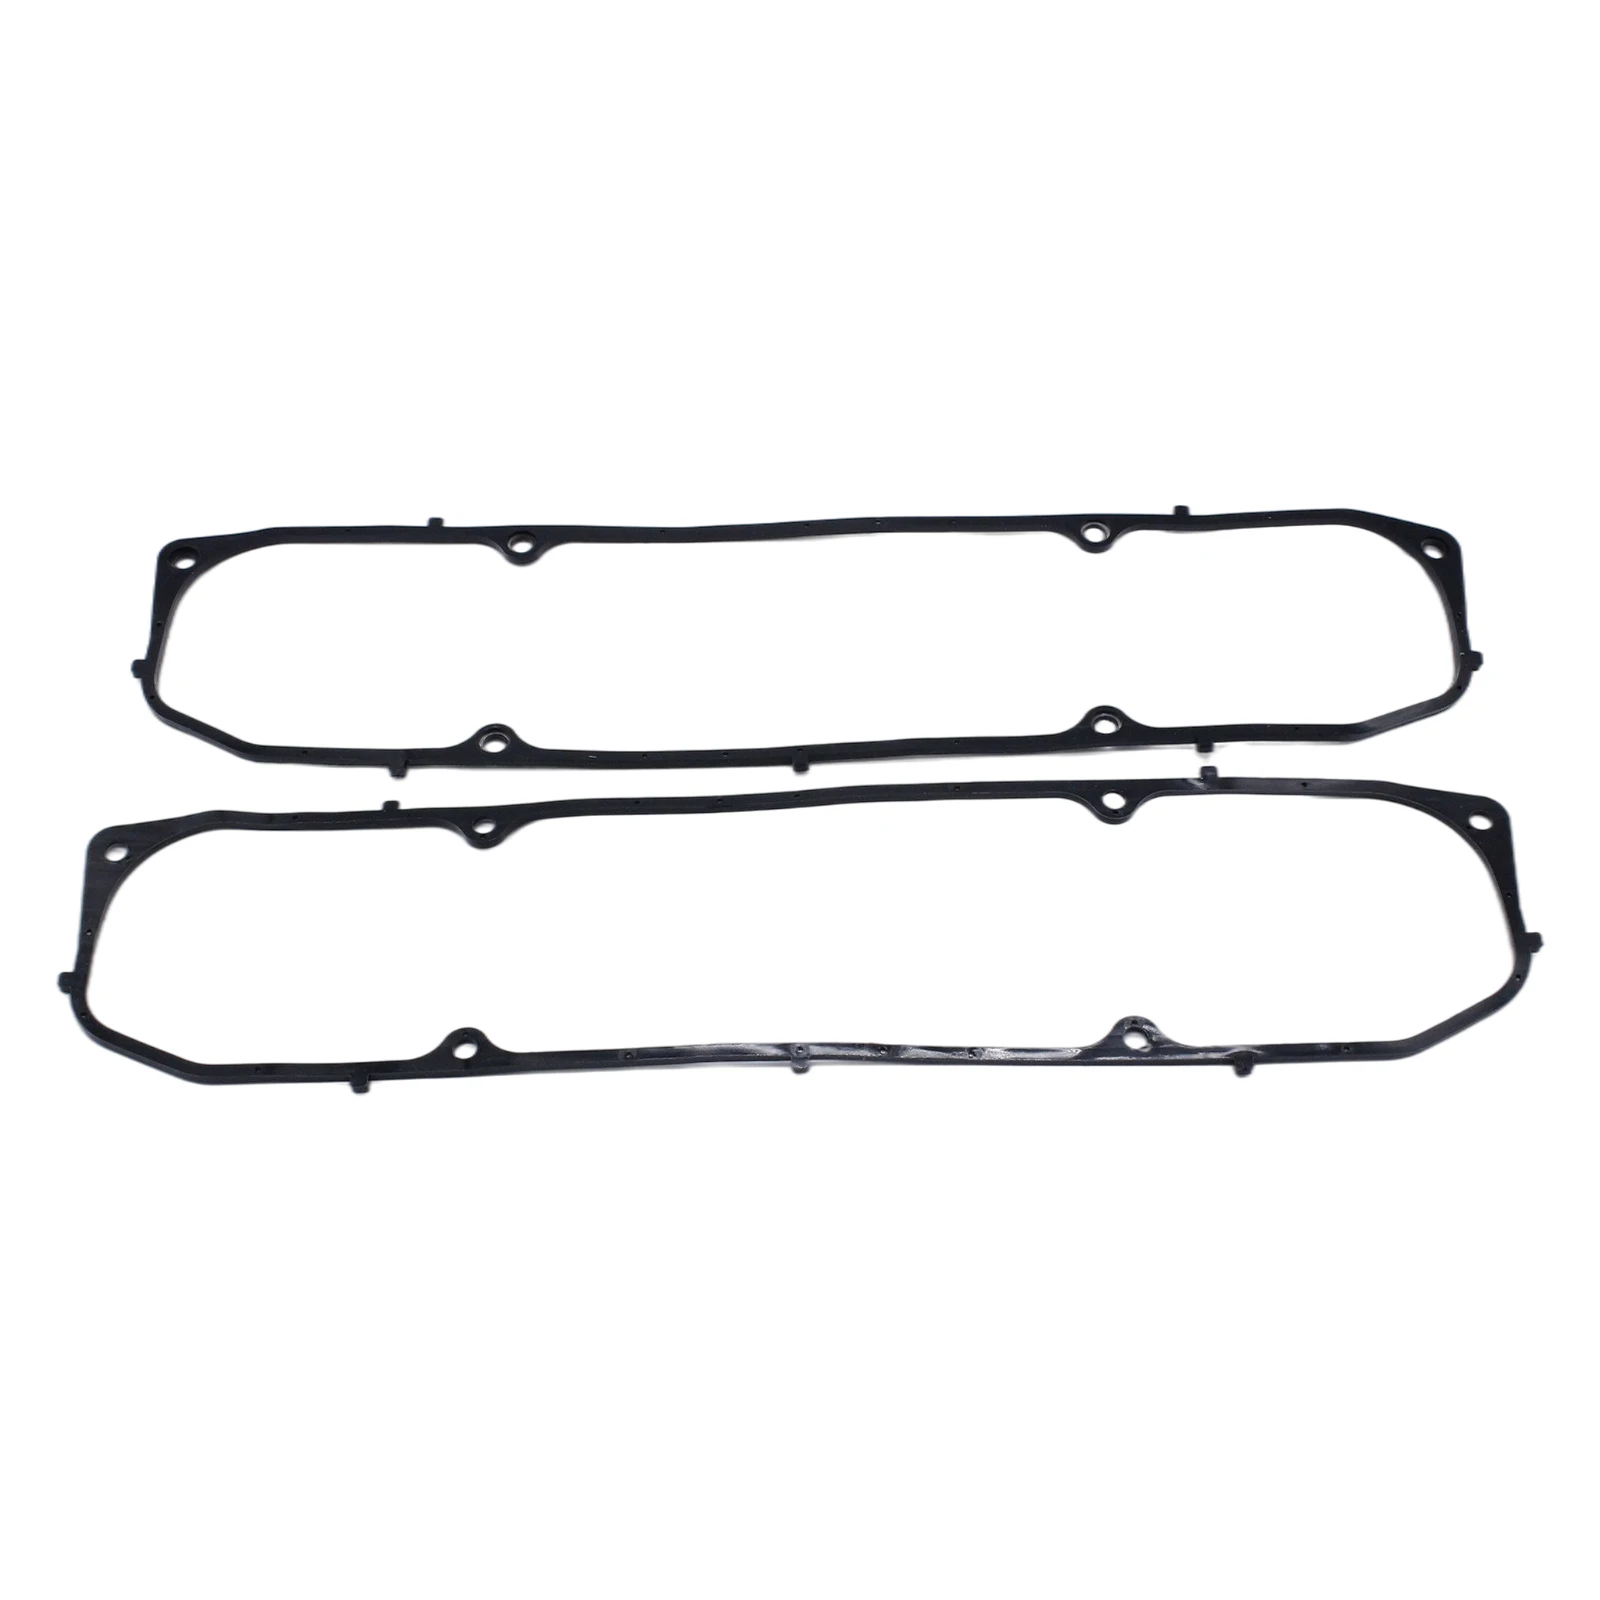 Steel Core Valve Cover Gaskets Rubber 383 400 440 Car Accessories Replacement 3/16`` Thick Big Block for Mopar